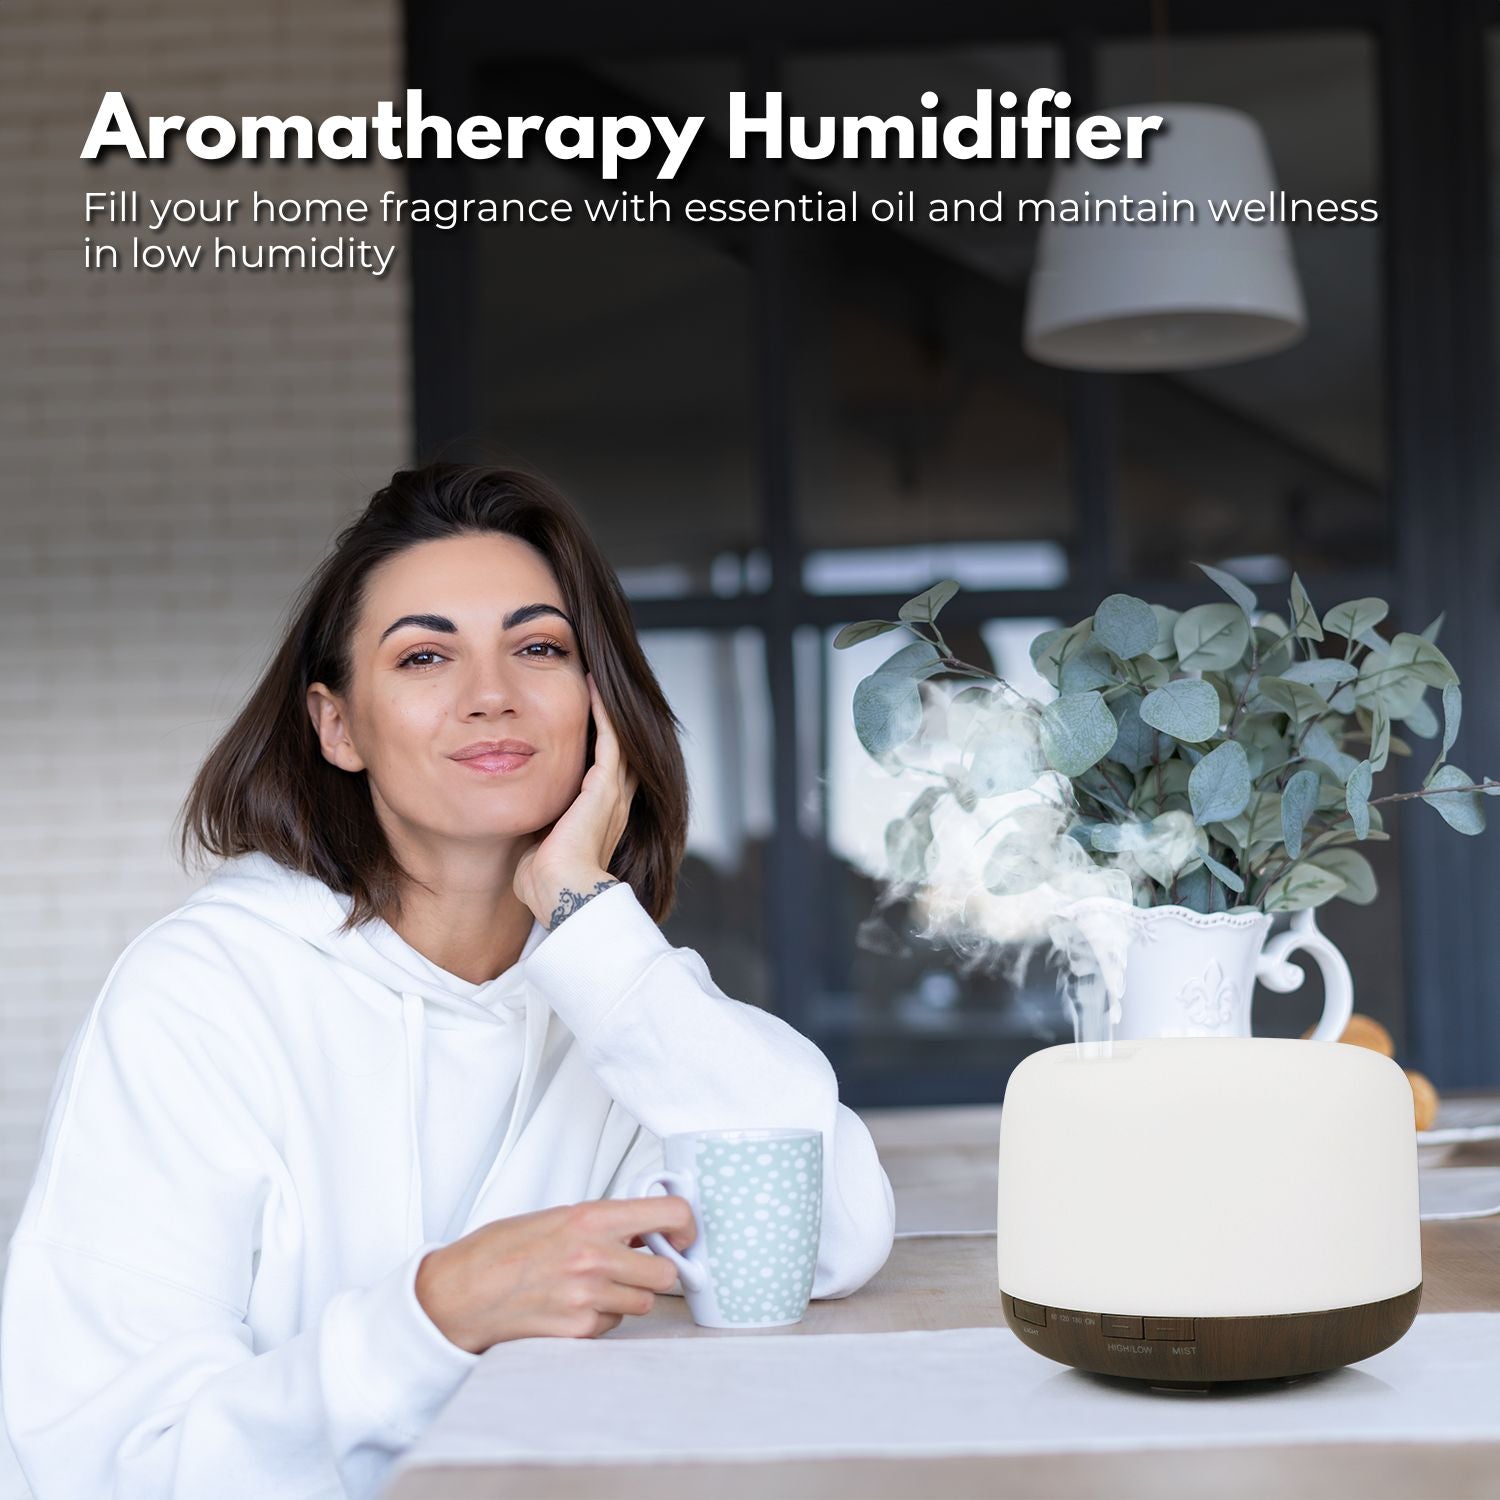 GOMINIMO 5 in1 LED Aromatherapy Essential Oil Diffuser 500ml (Dark Wood Base)